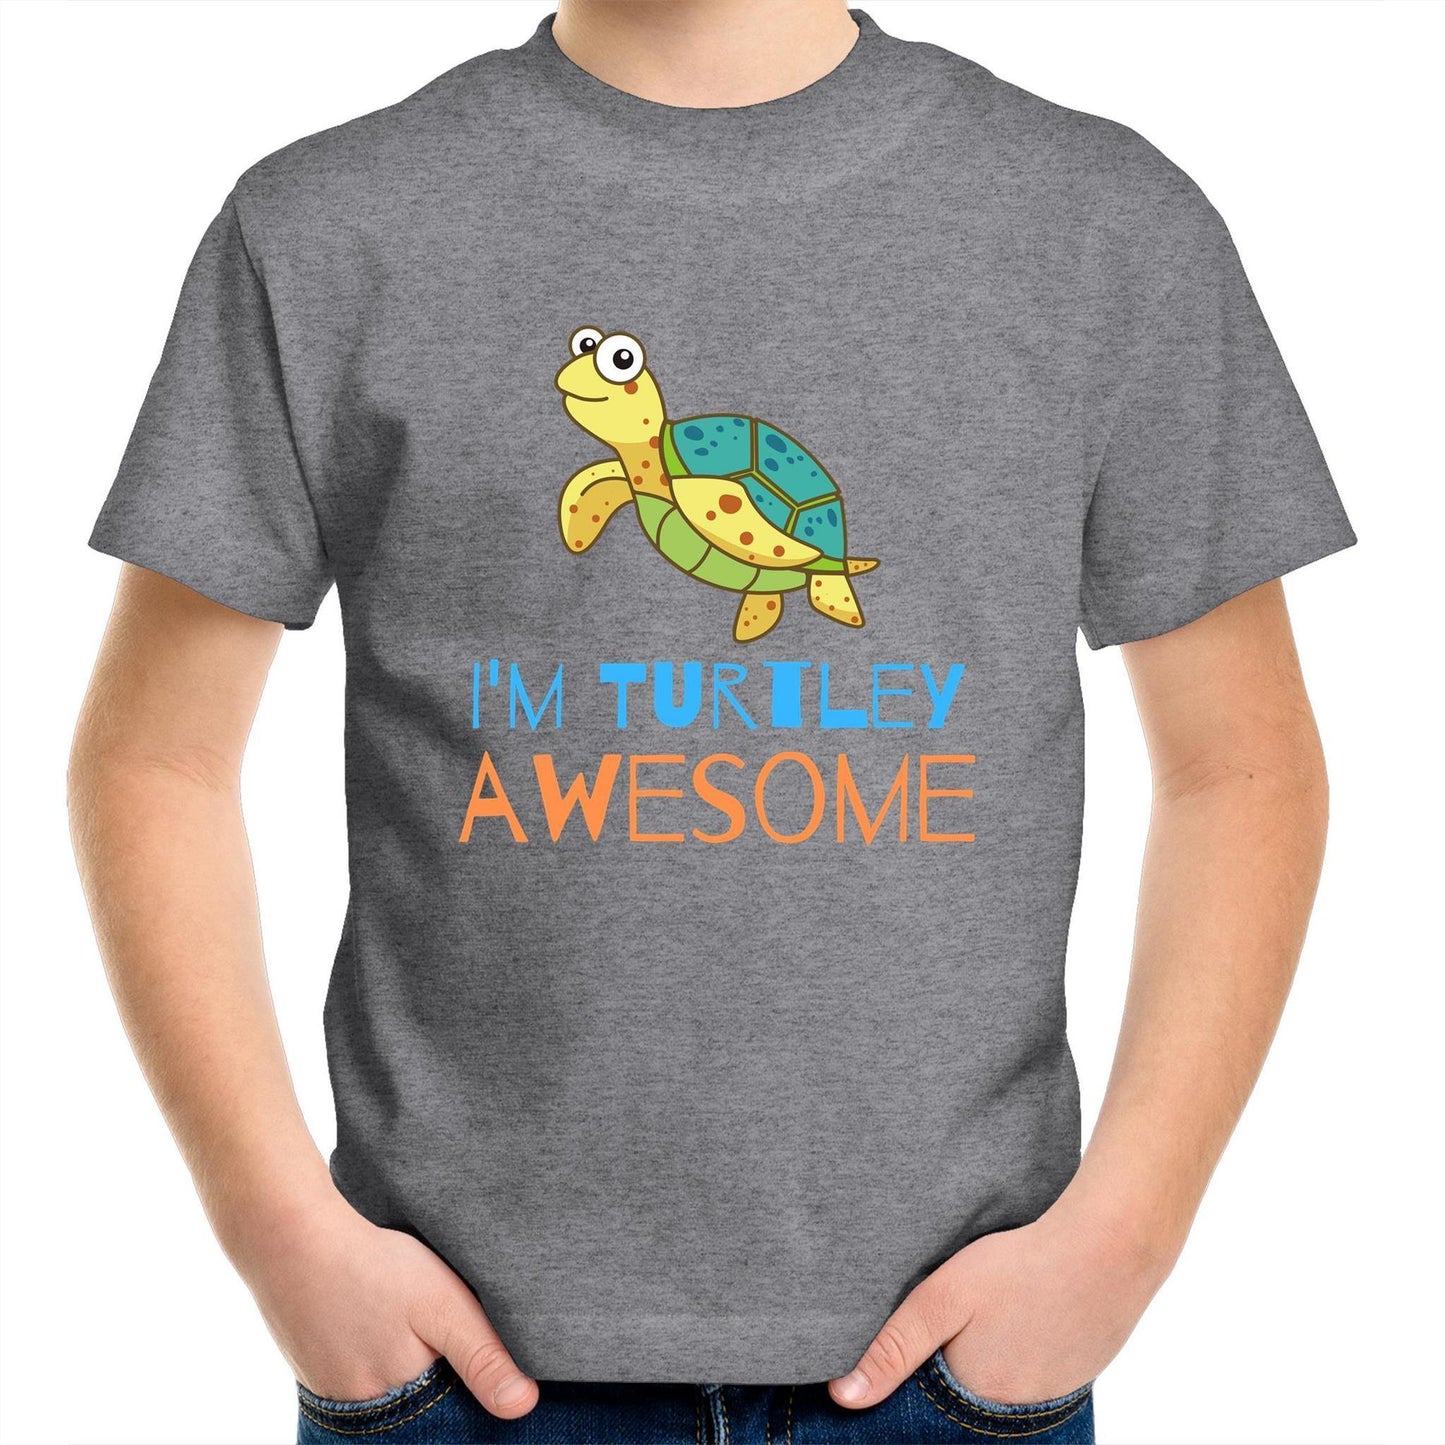 I'm Turtley Awesome - Kids Youth Crew T-Shirt Grey Marle Kids Youth T-shirt animal